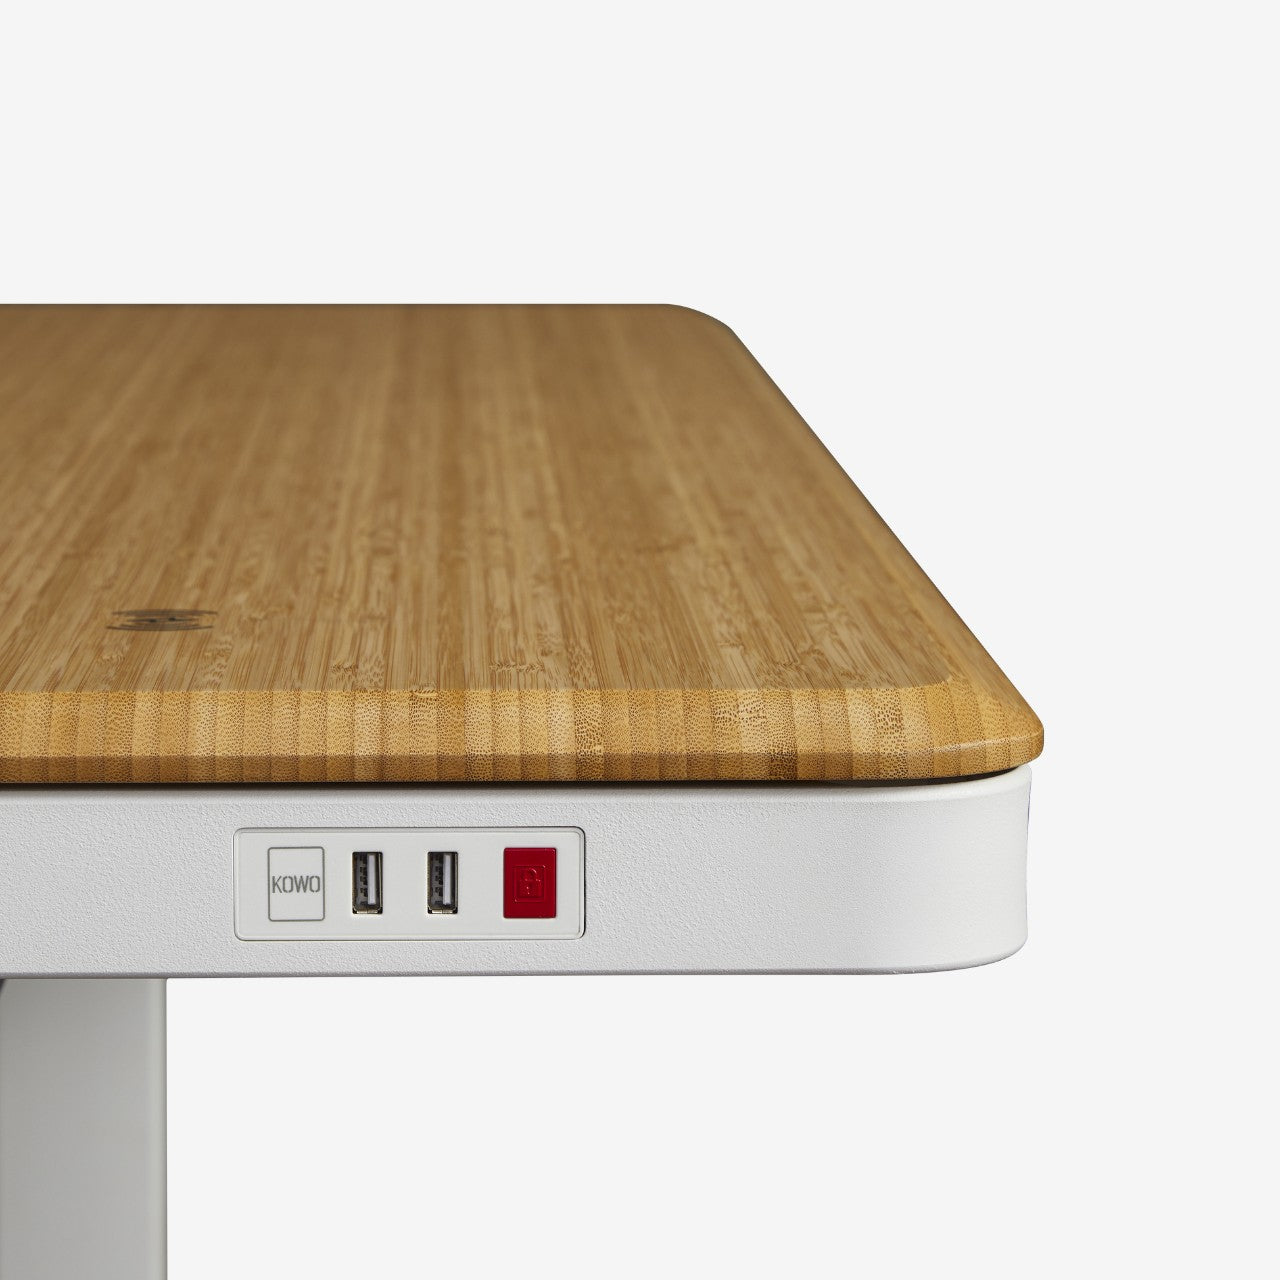 KOWO all-in-one power station includes type A and Types C USB fast chargers